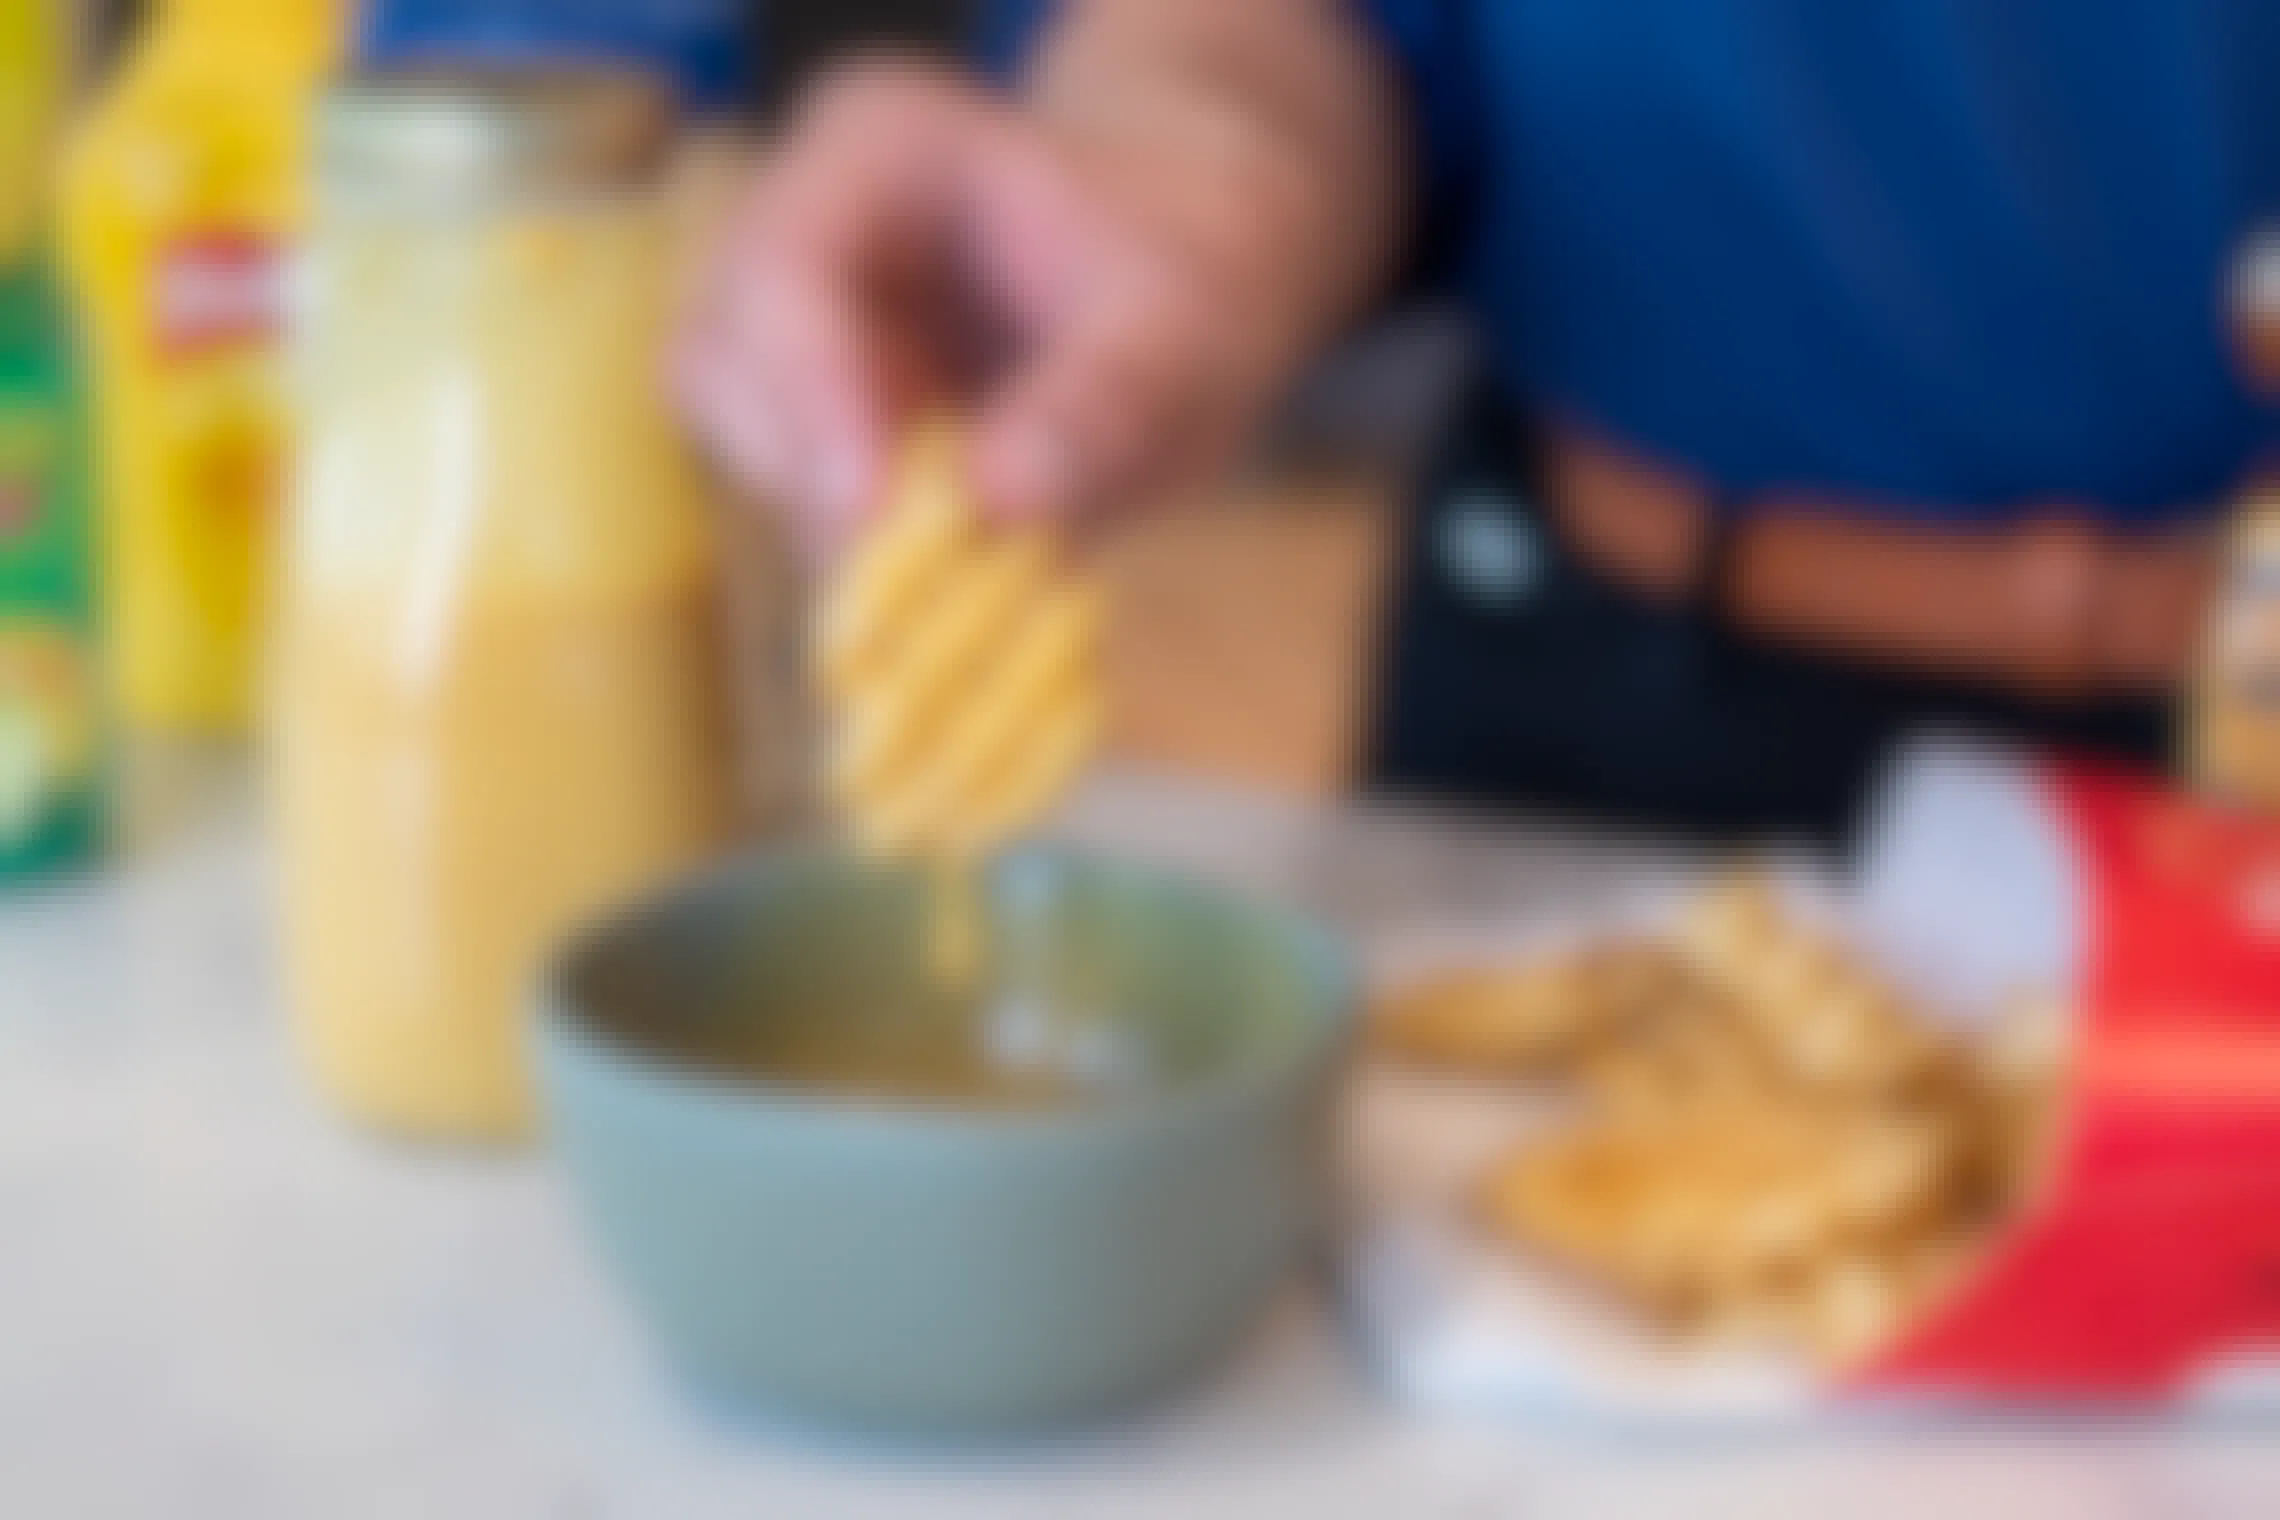 Homemade chick-fil-a sauce being poured from a glass bottle into a bowl.